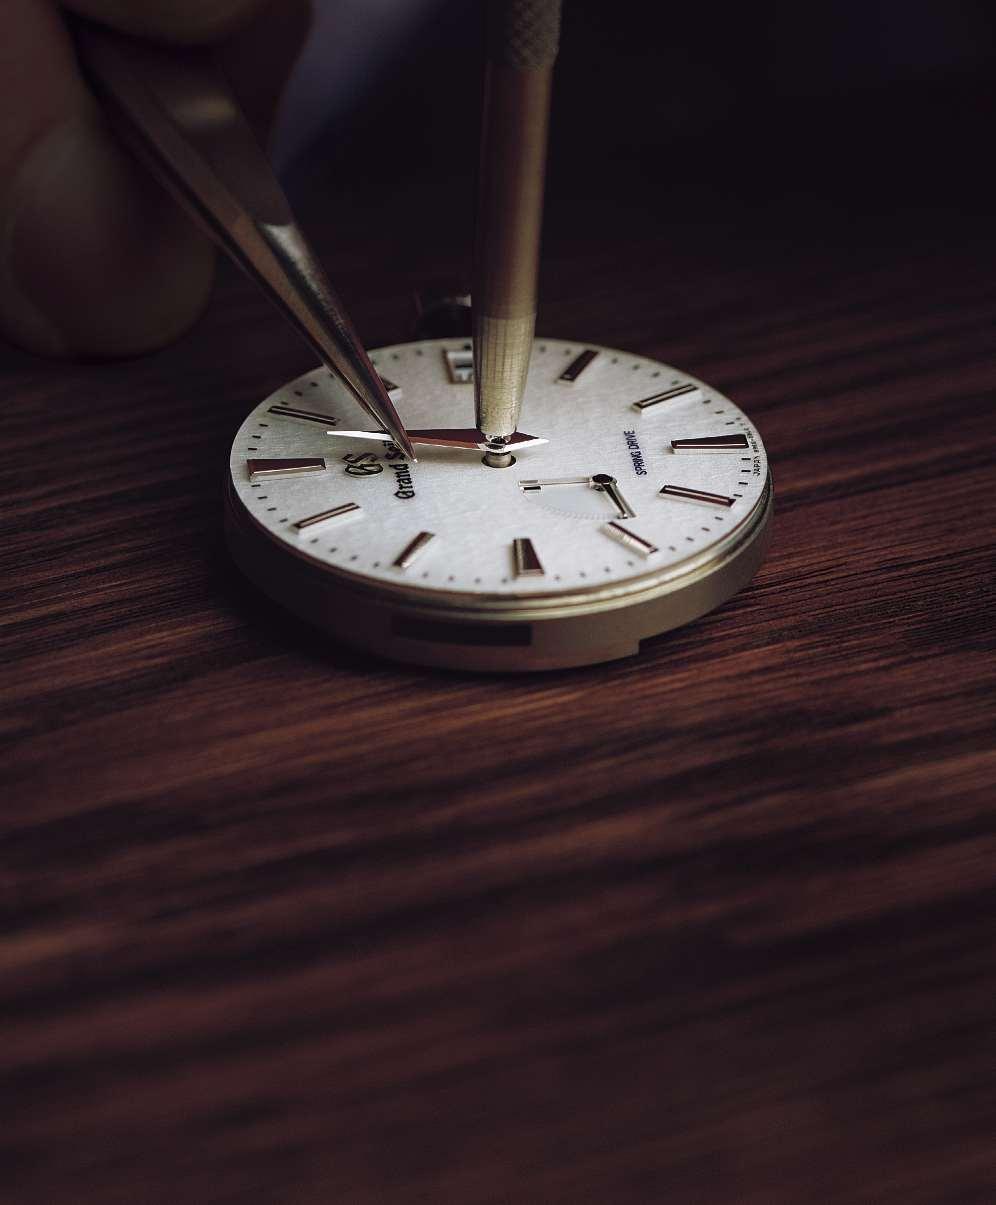 Made by hand for those who value perfection. Observe the glide motion second hand of a Spring Drive watch.